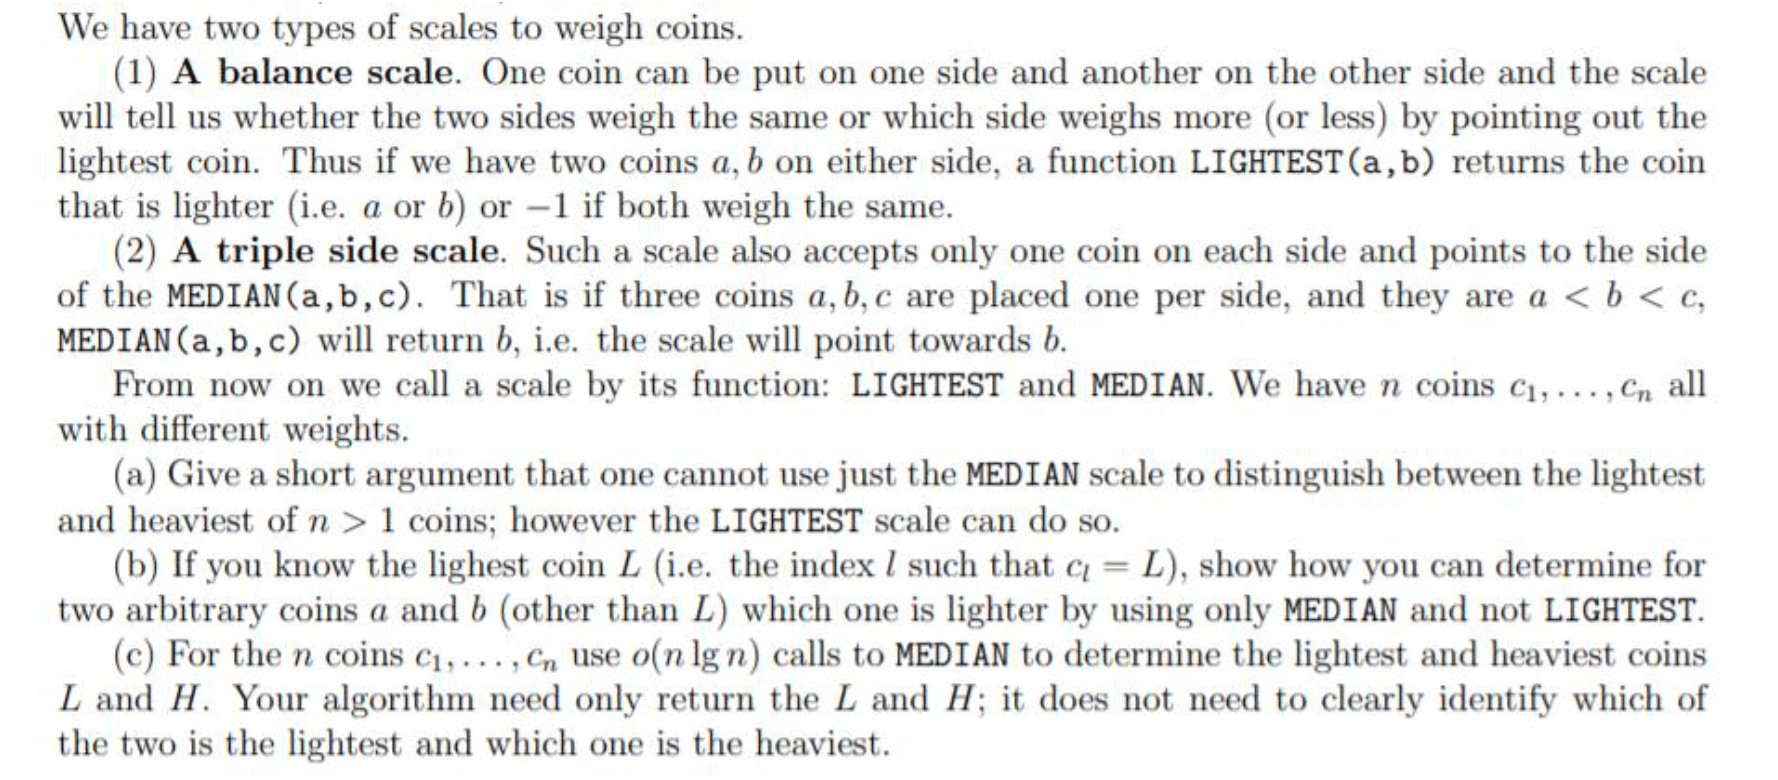 We have two types of scales to weigh coins. (1) A